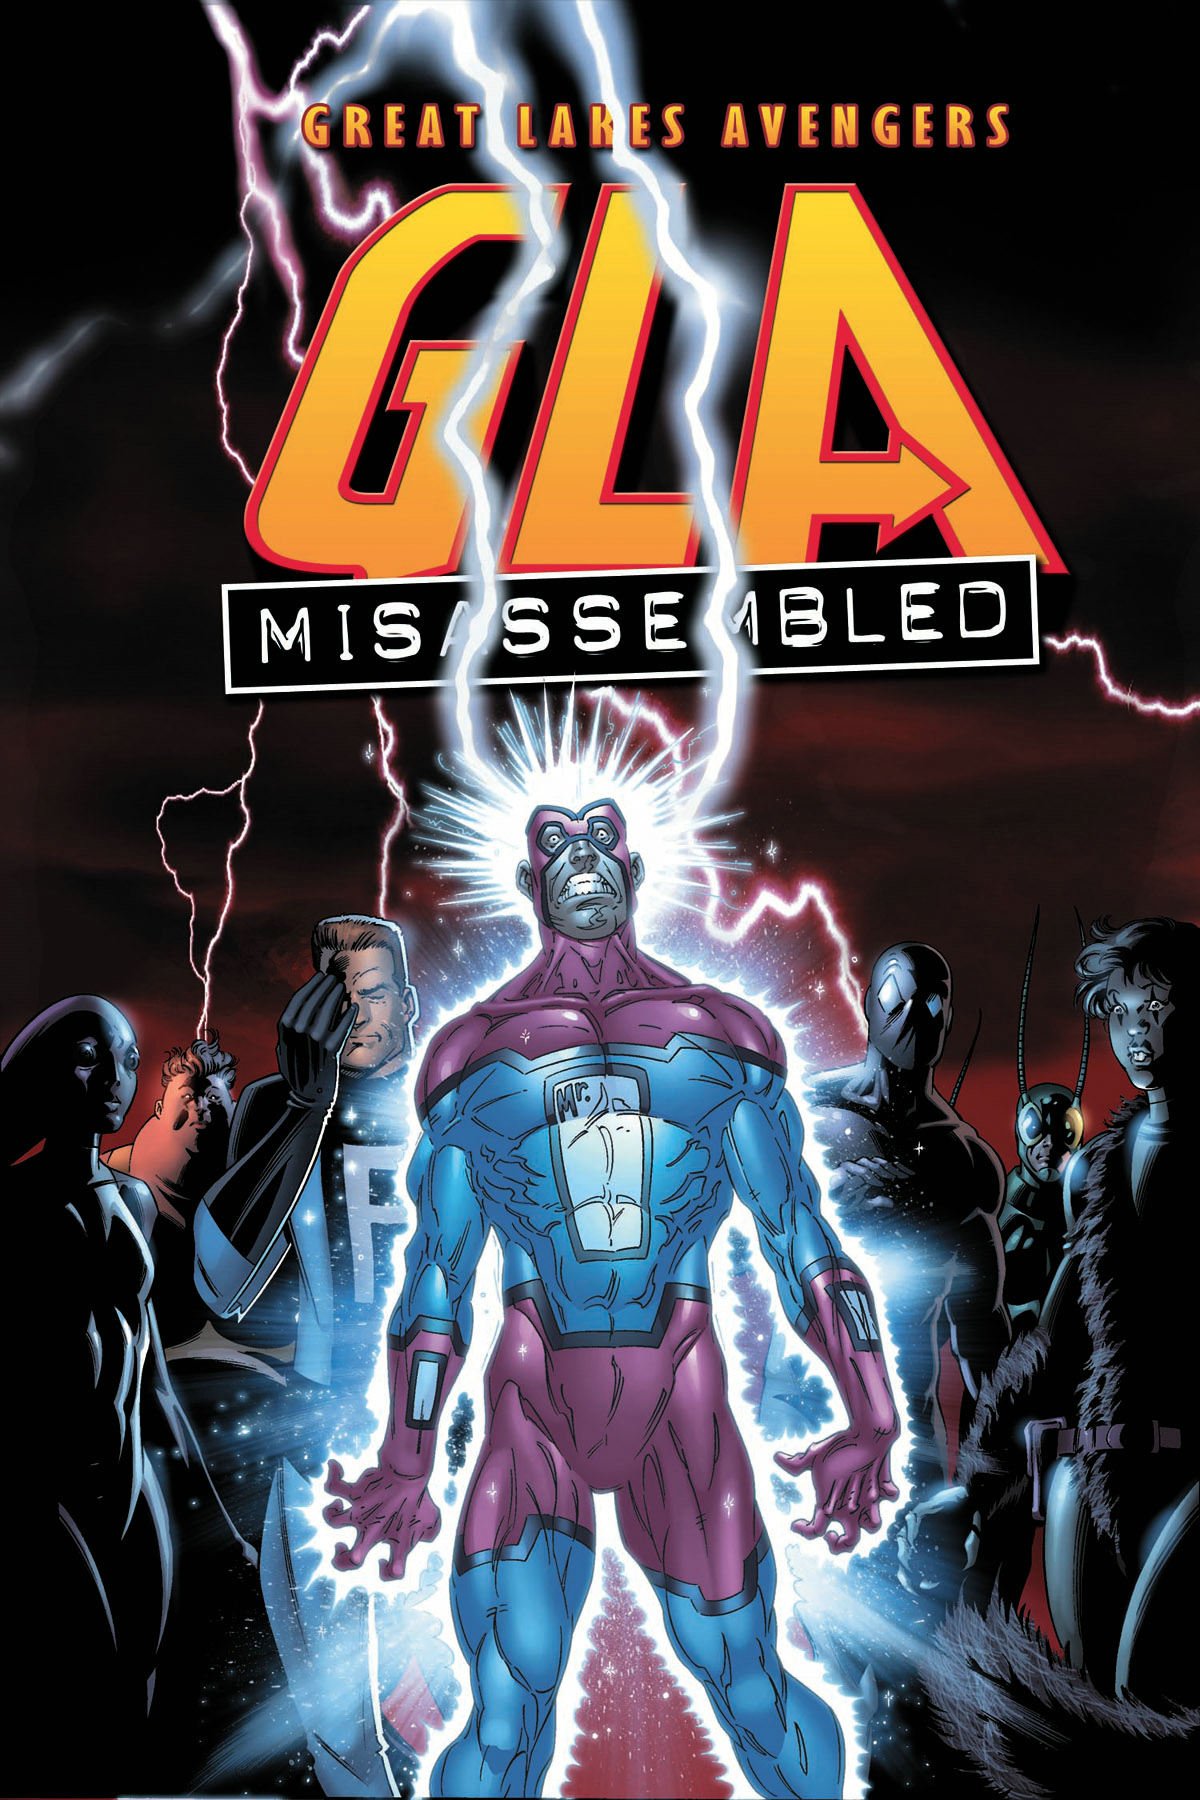 Great Lakes Avengers Backgrounds, Compatible - PC, Mobile, Gadgets| 1200x1800 px